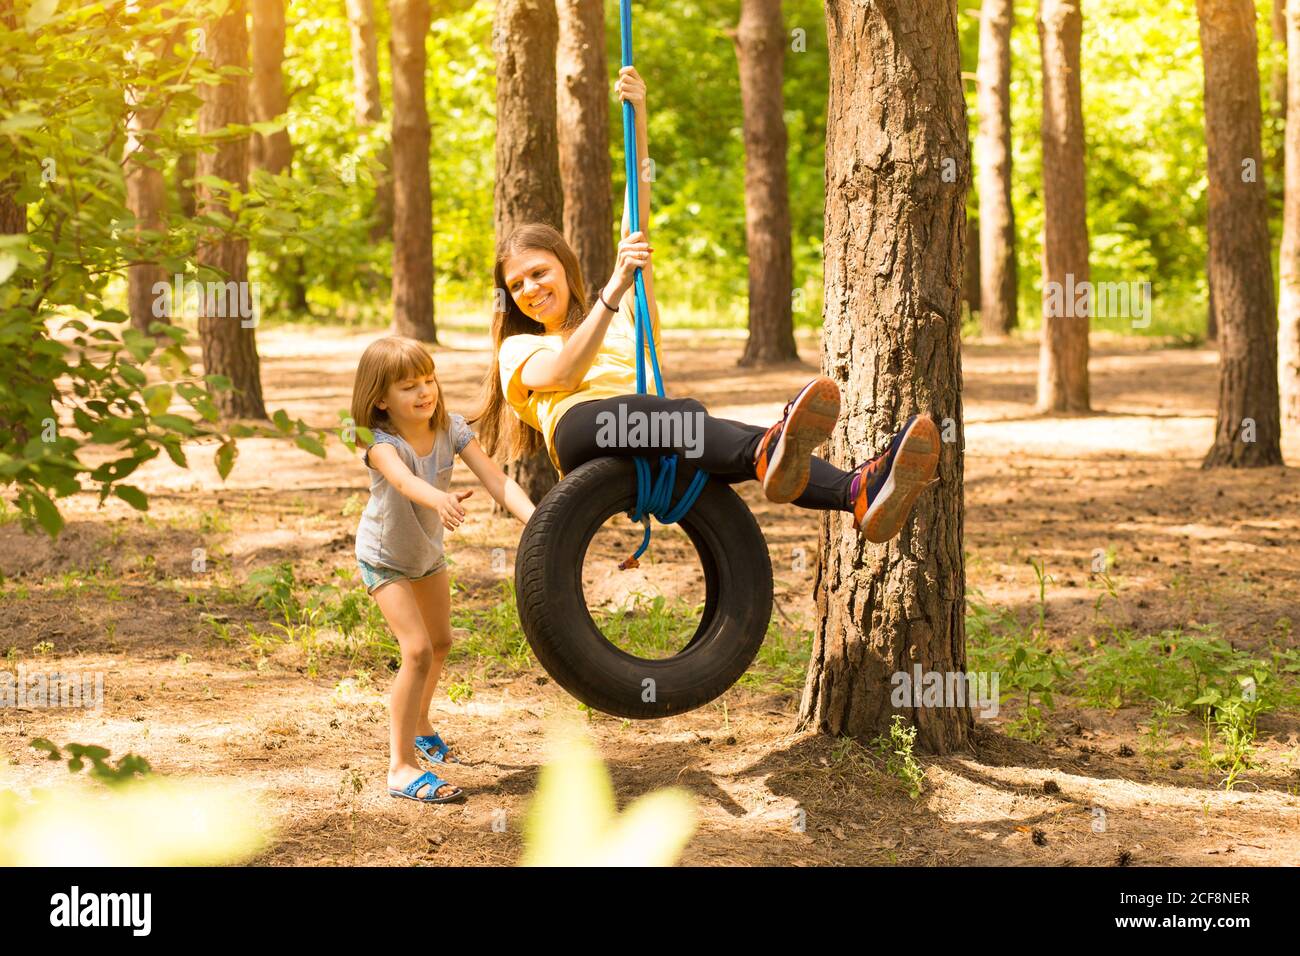 Happy child daughter pushing mother on tire swing in autumn garden Stock Photo